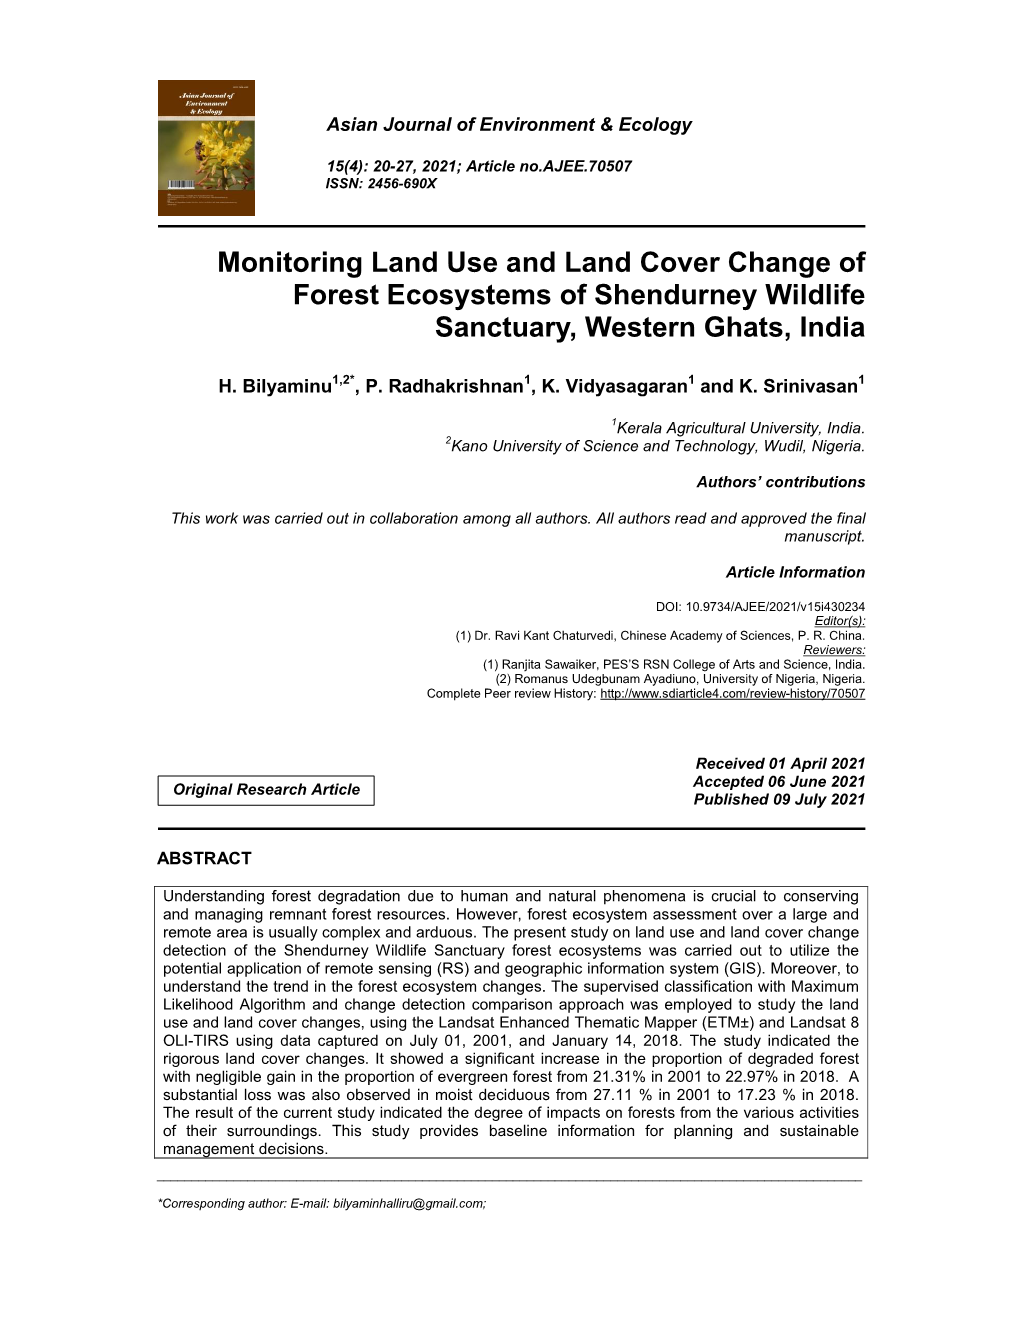 Monitoring Land Use and Land Cover Change of Forest Ecosystems of Shendurney Wildlife Sanctuary, Western Ghats, India